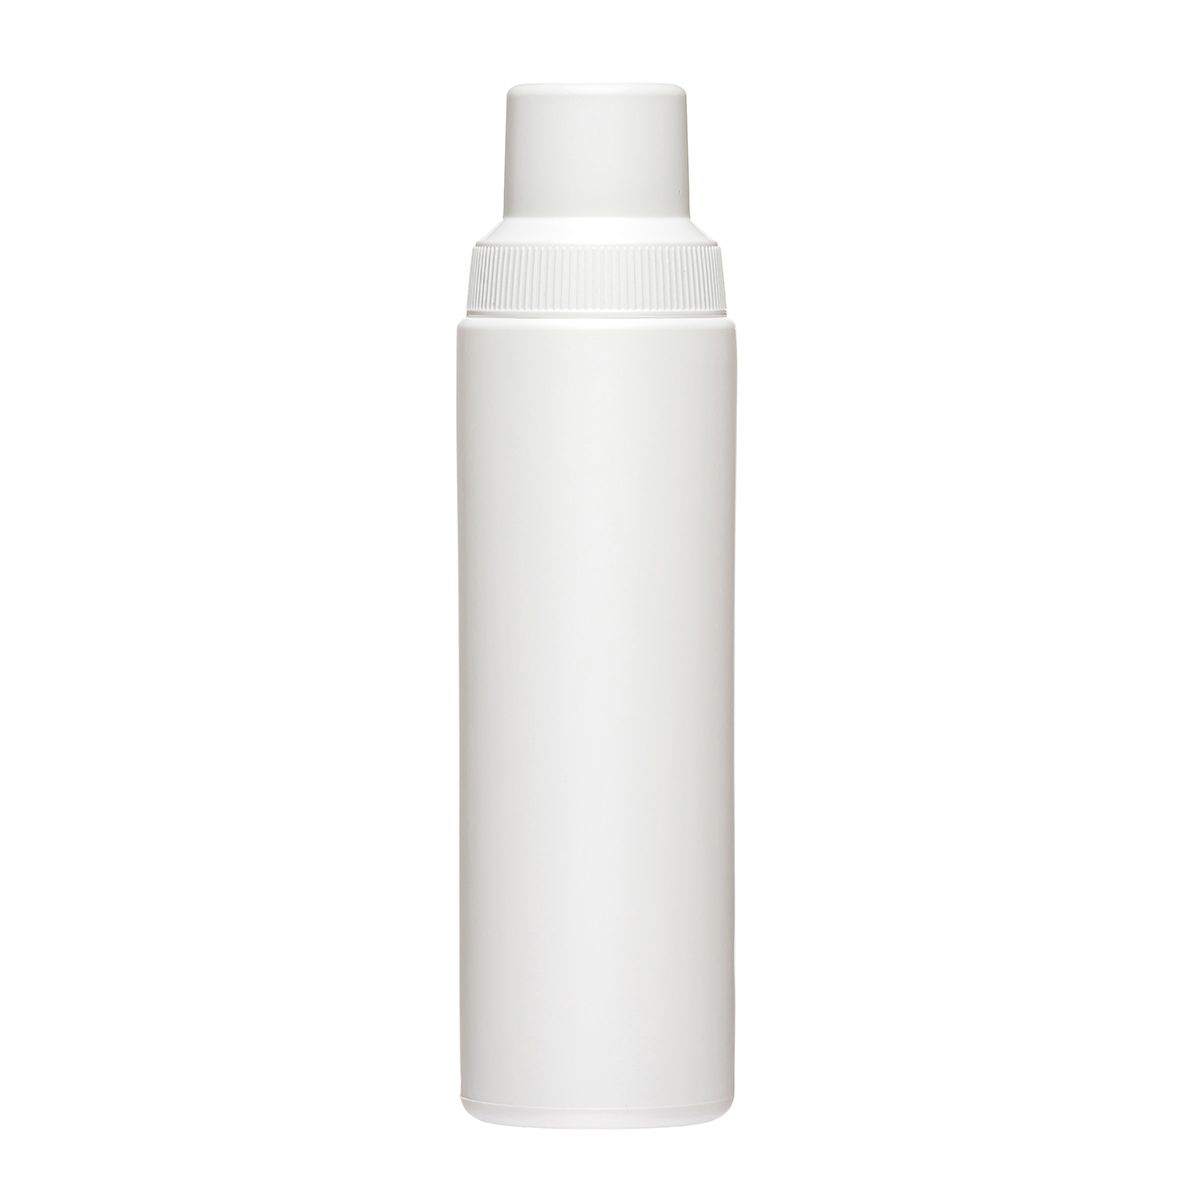 The 200 ml HDPE bottle Dufa 200 with measurin cap is perfect choice for any product in household chemicals.  This series of bottles is presented in different volumes: 200 ml and 750 ml. by Pack Store Europe, packstore.eu